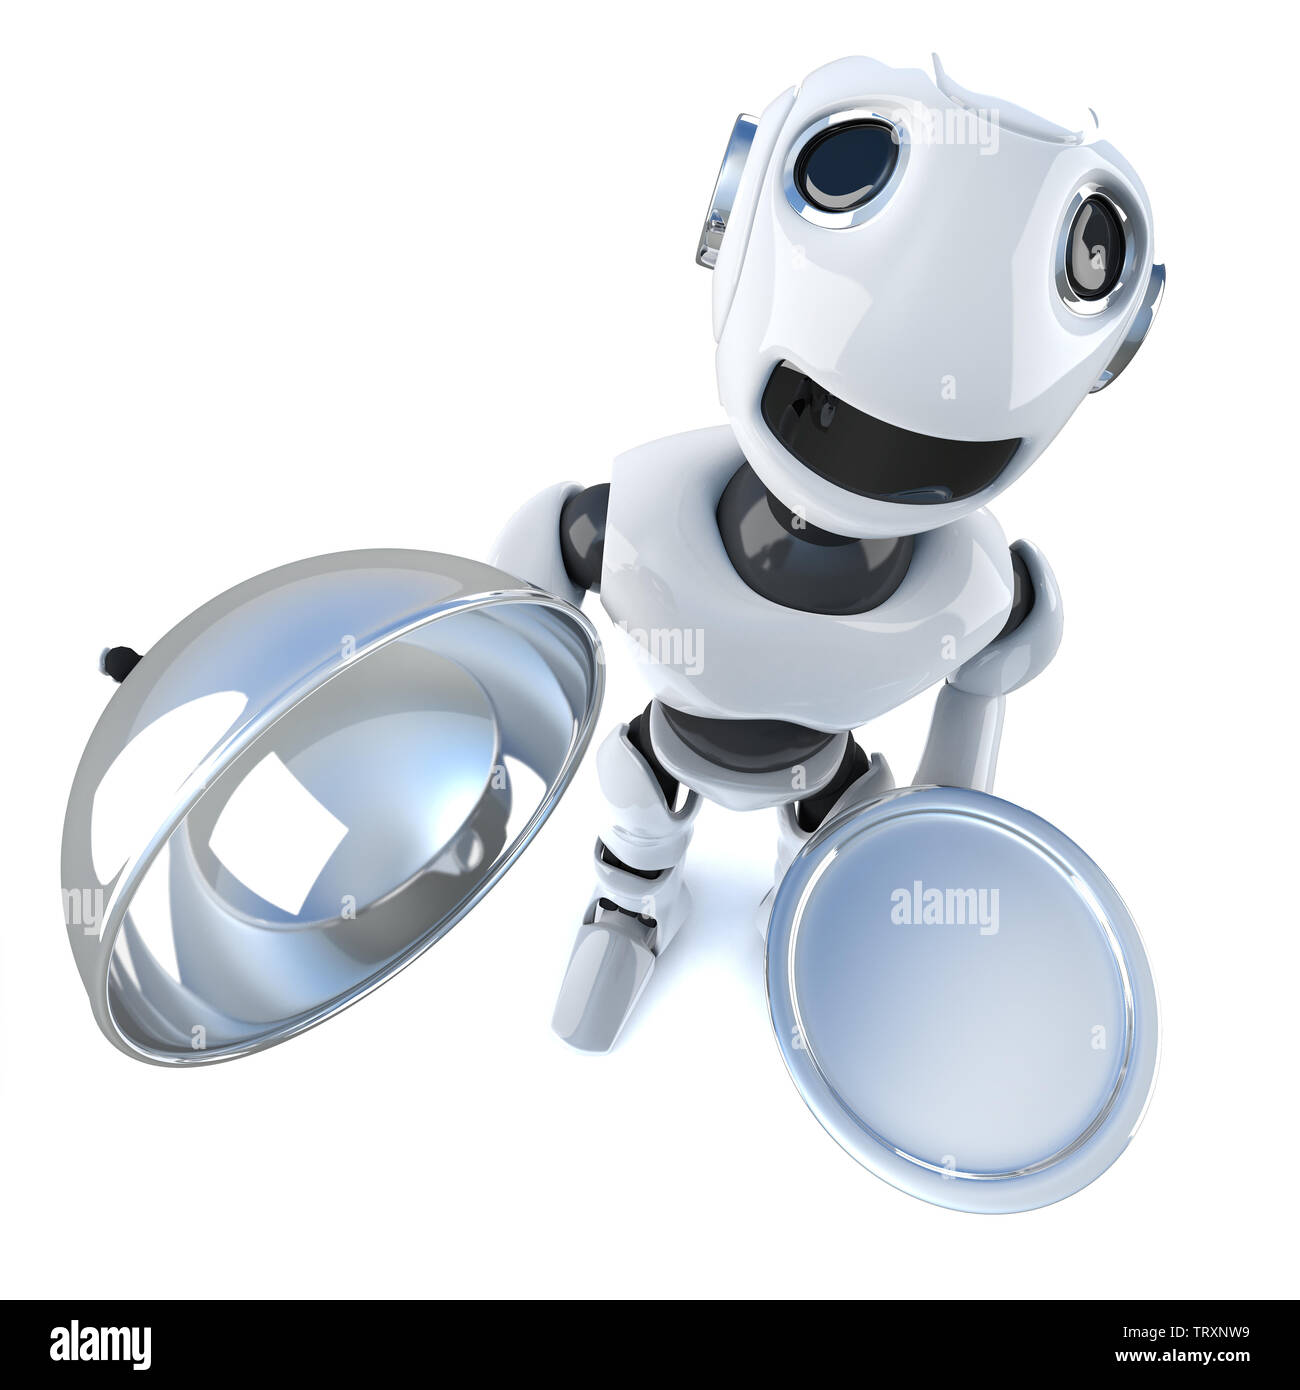 3d render of a funny cartoon robot character holding a silver service VIP tray and lid Stock Photo